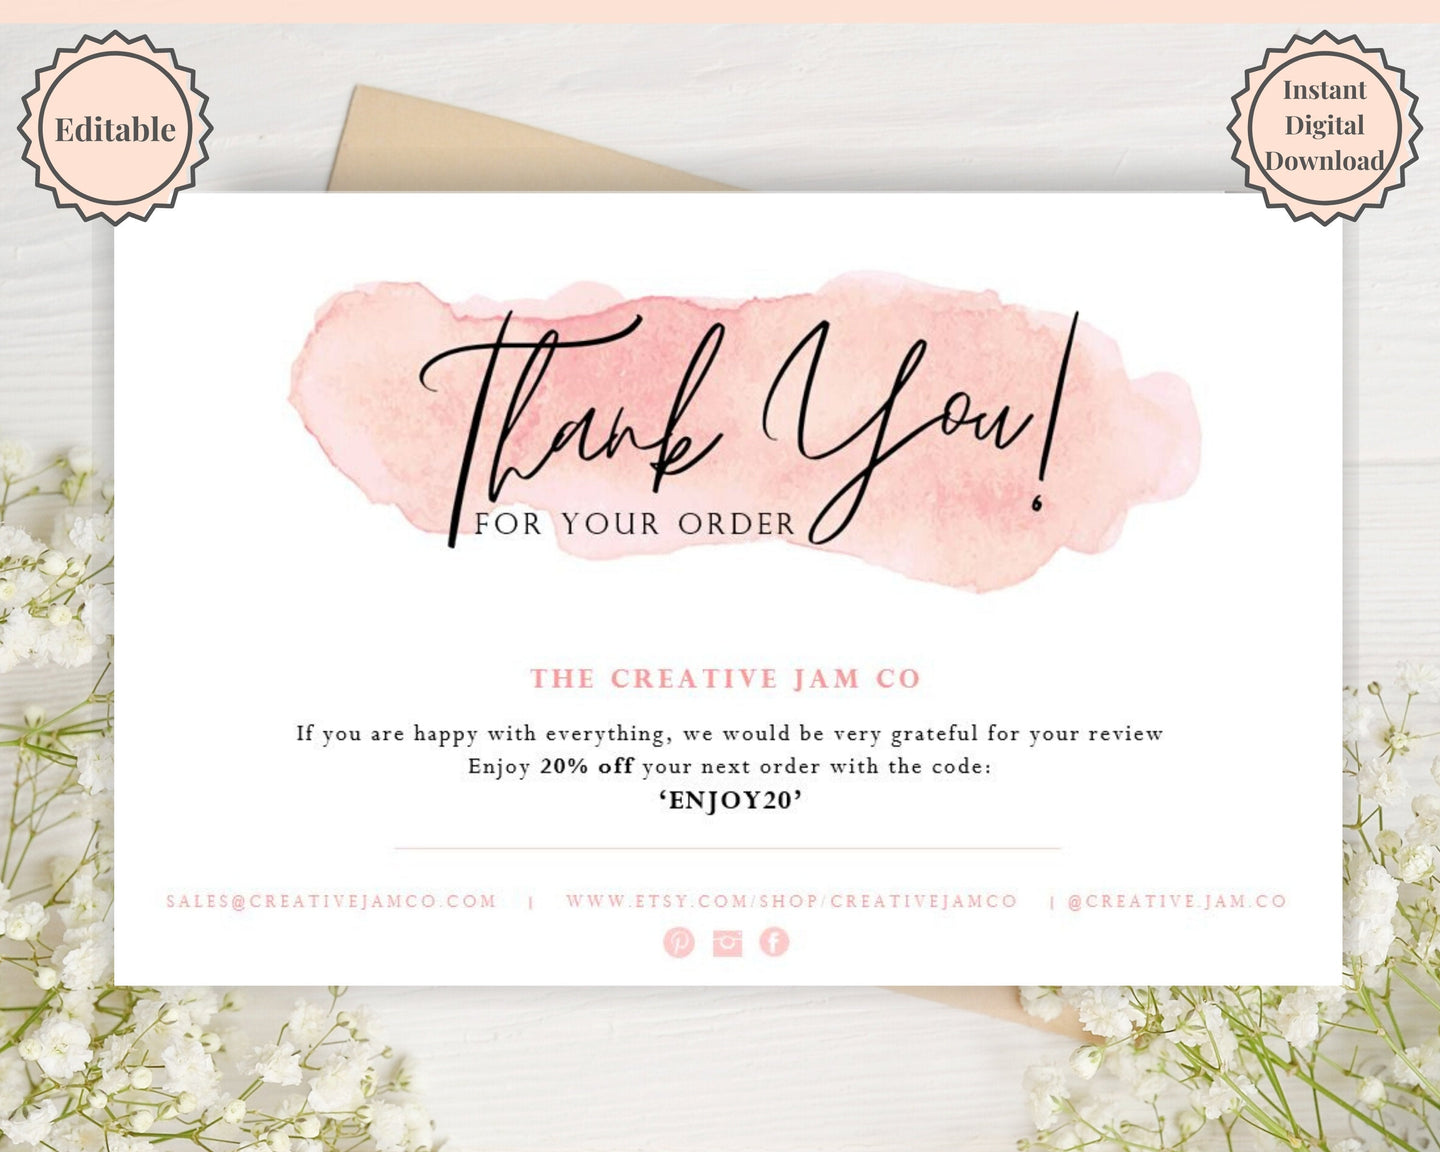 Business Thank You For Your Order Insert Card Template. EDITABLE Parcel Insert, Etsy Order, Small Online Business Purchase | Pink Watercolor Style 3